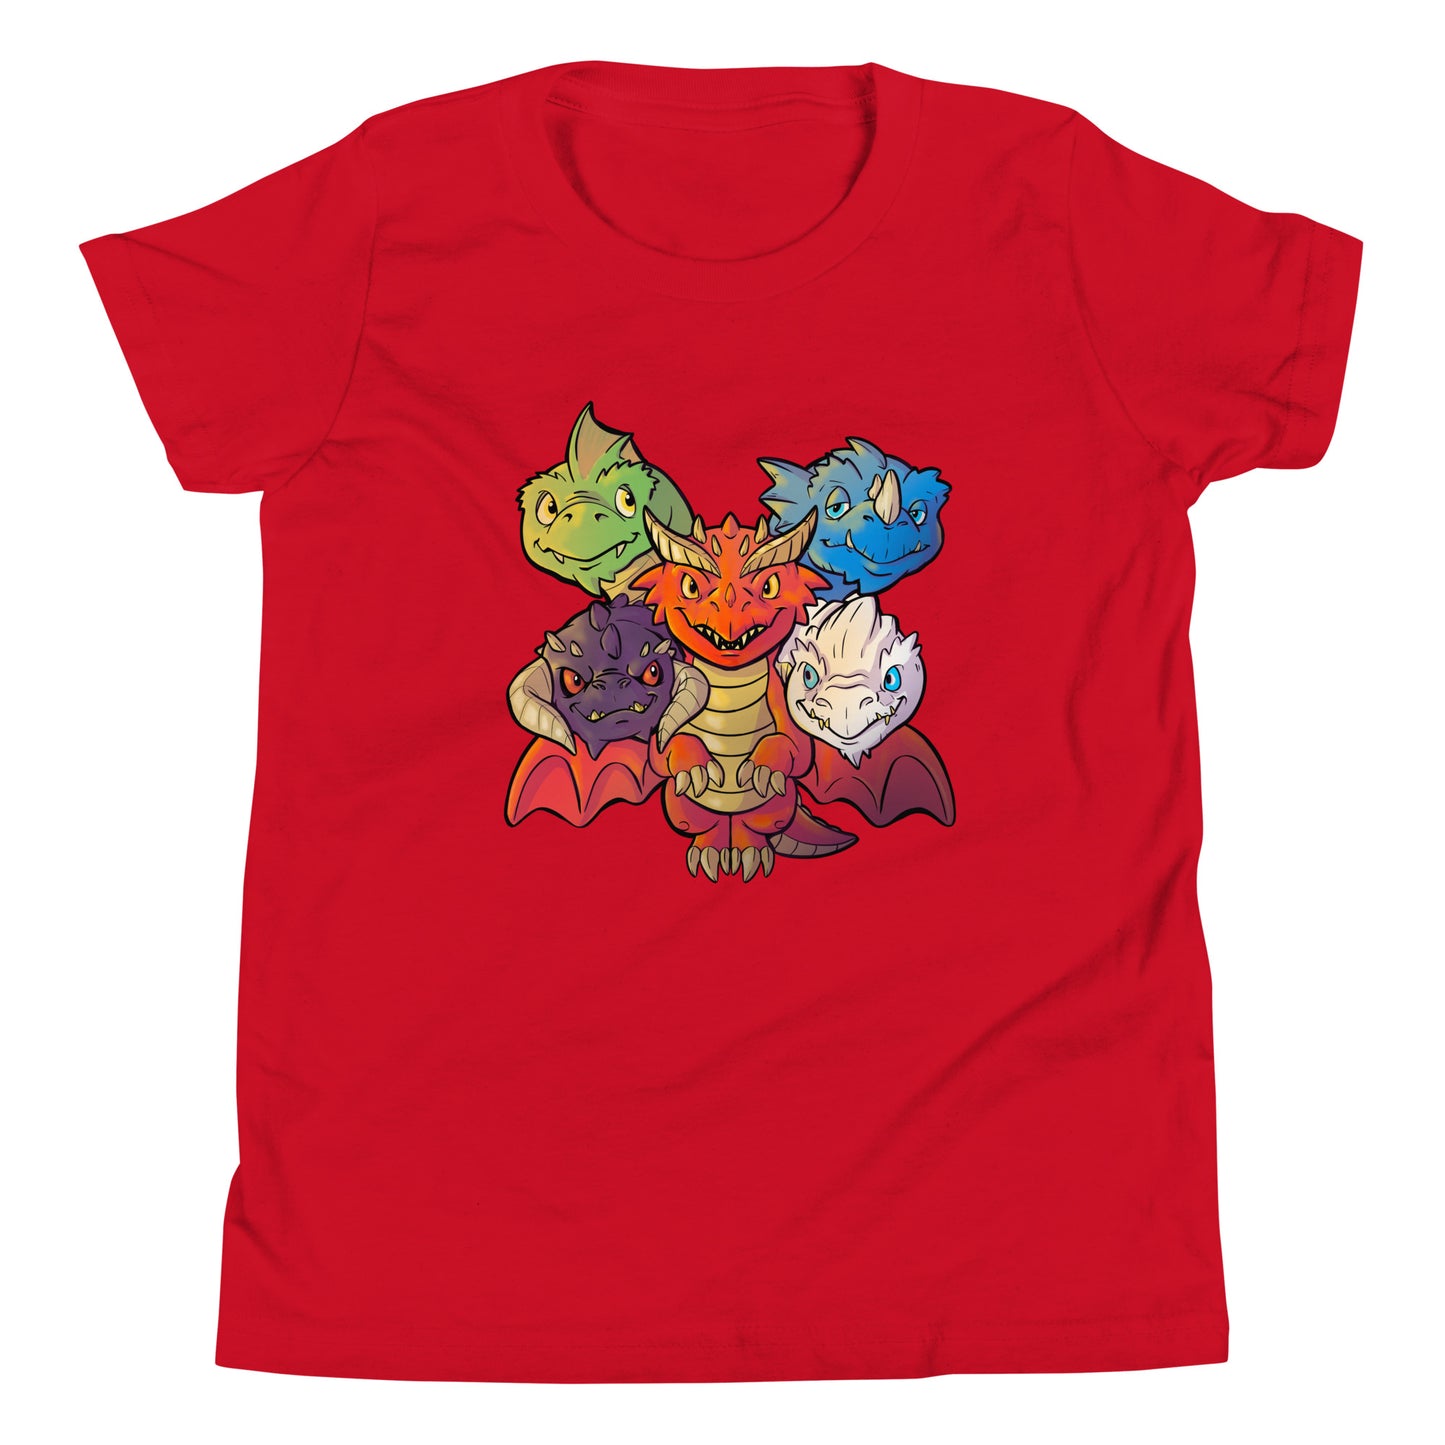 Little Queen of Dragons Youth Short Sleeve T-Shirt  Level 1 Gamers Red S 